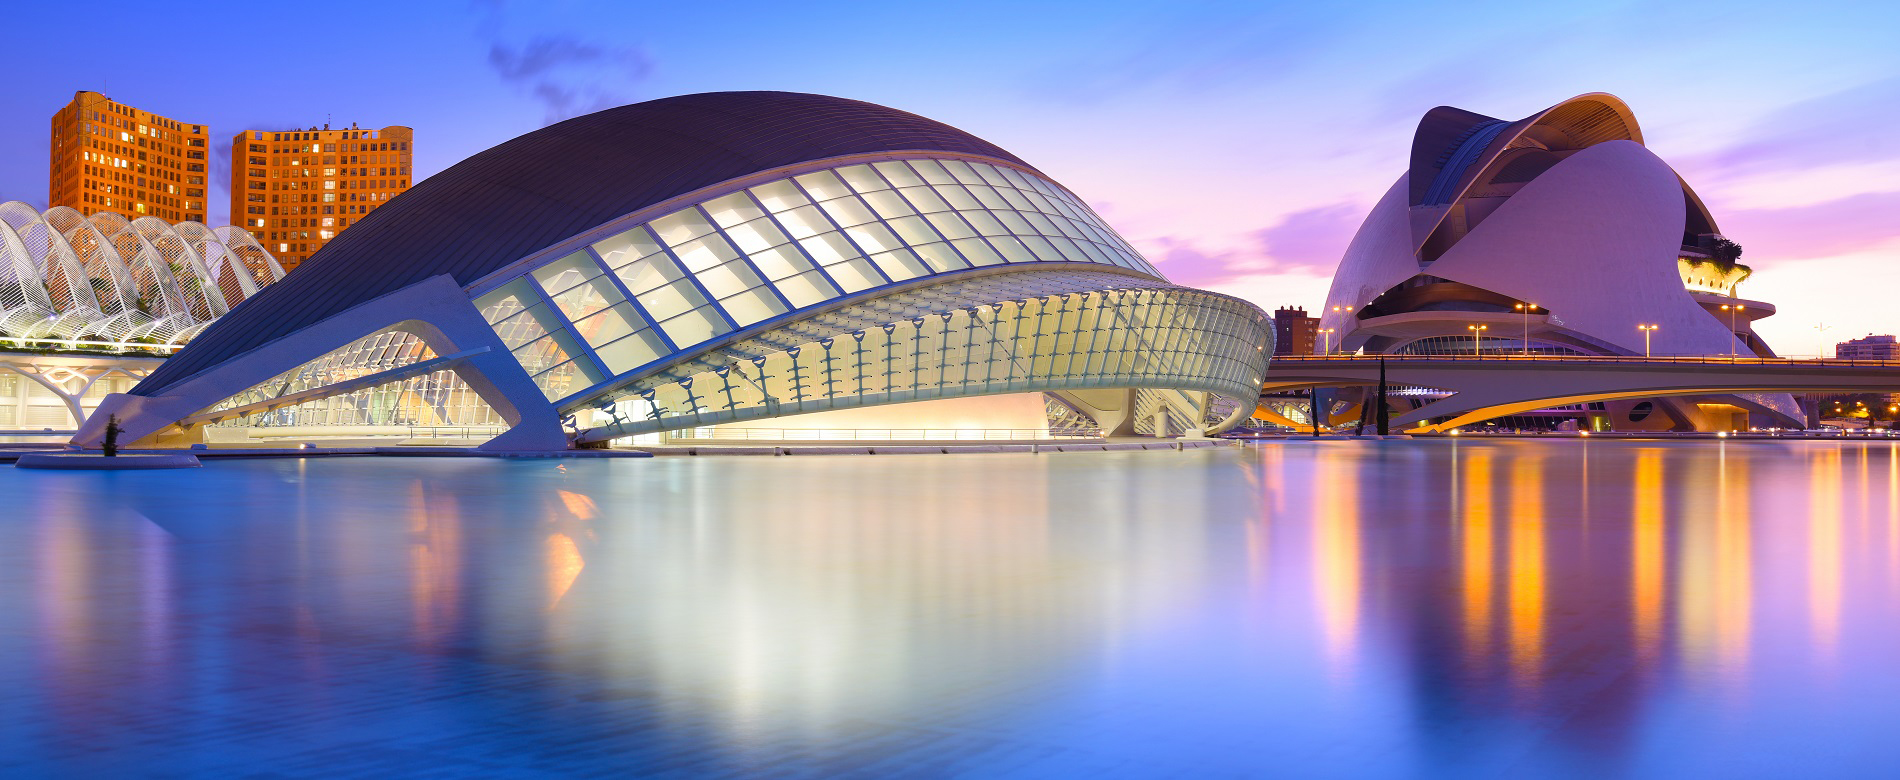 City of Arts and Sciences in Valencia at dusk.